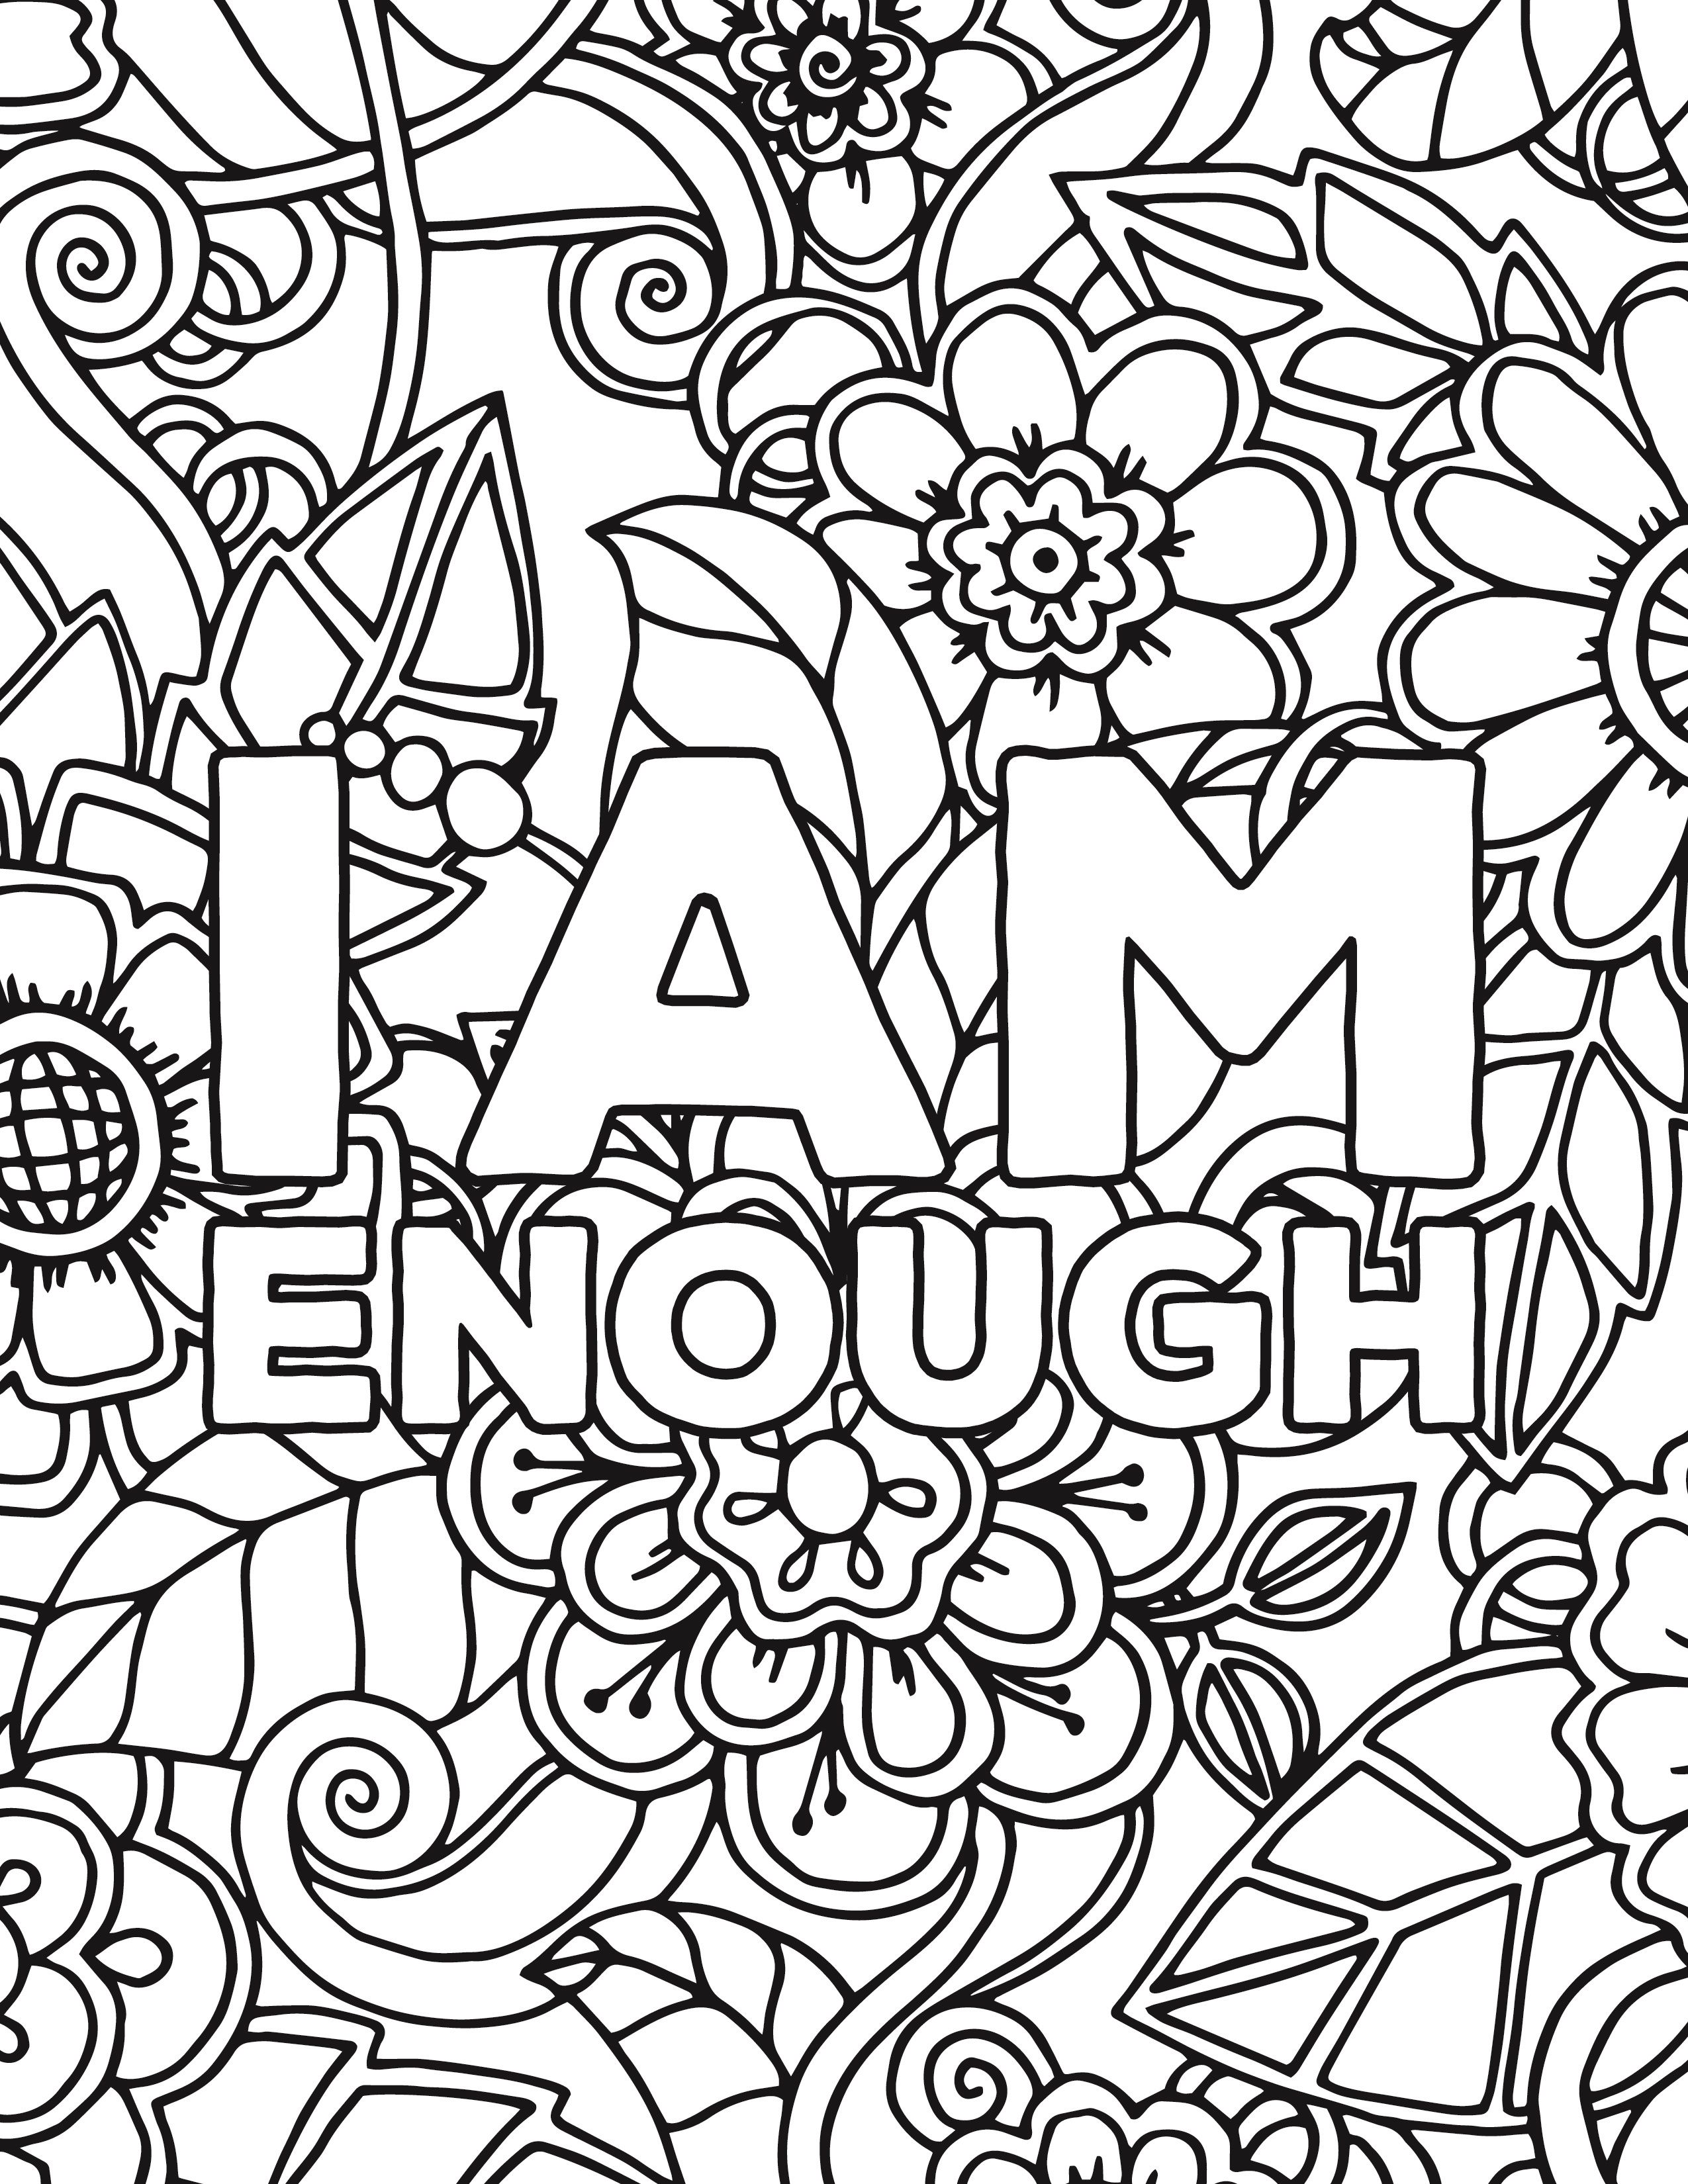 Floral + Affirmations Coloring Pages | totallifecare | Love coloring pages,  Quote coloring pages, Cute coloring pages